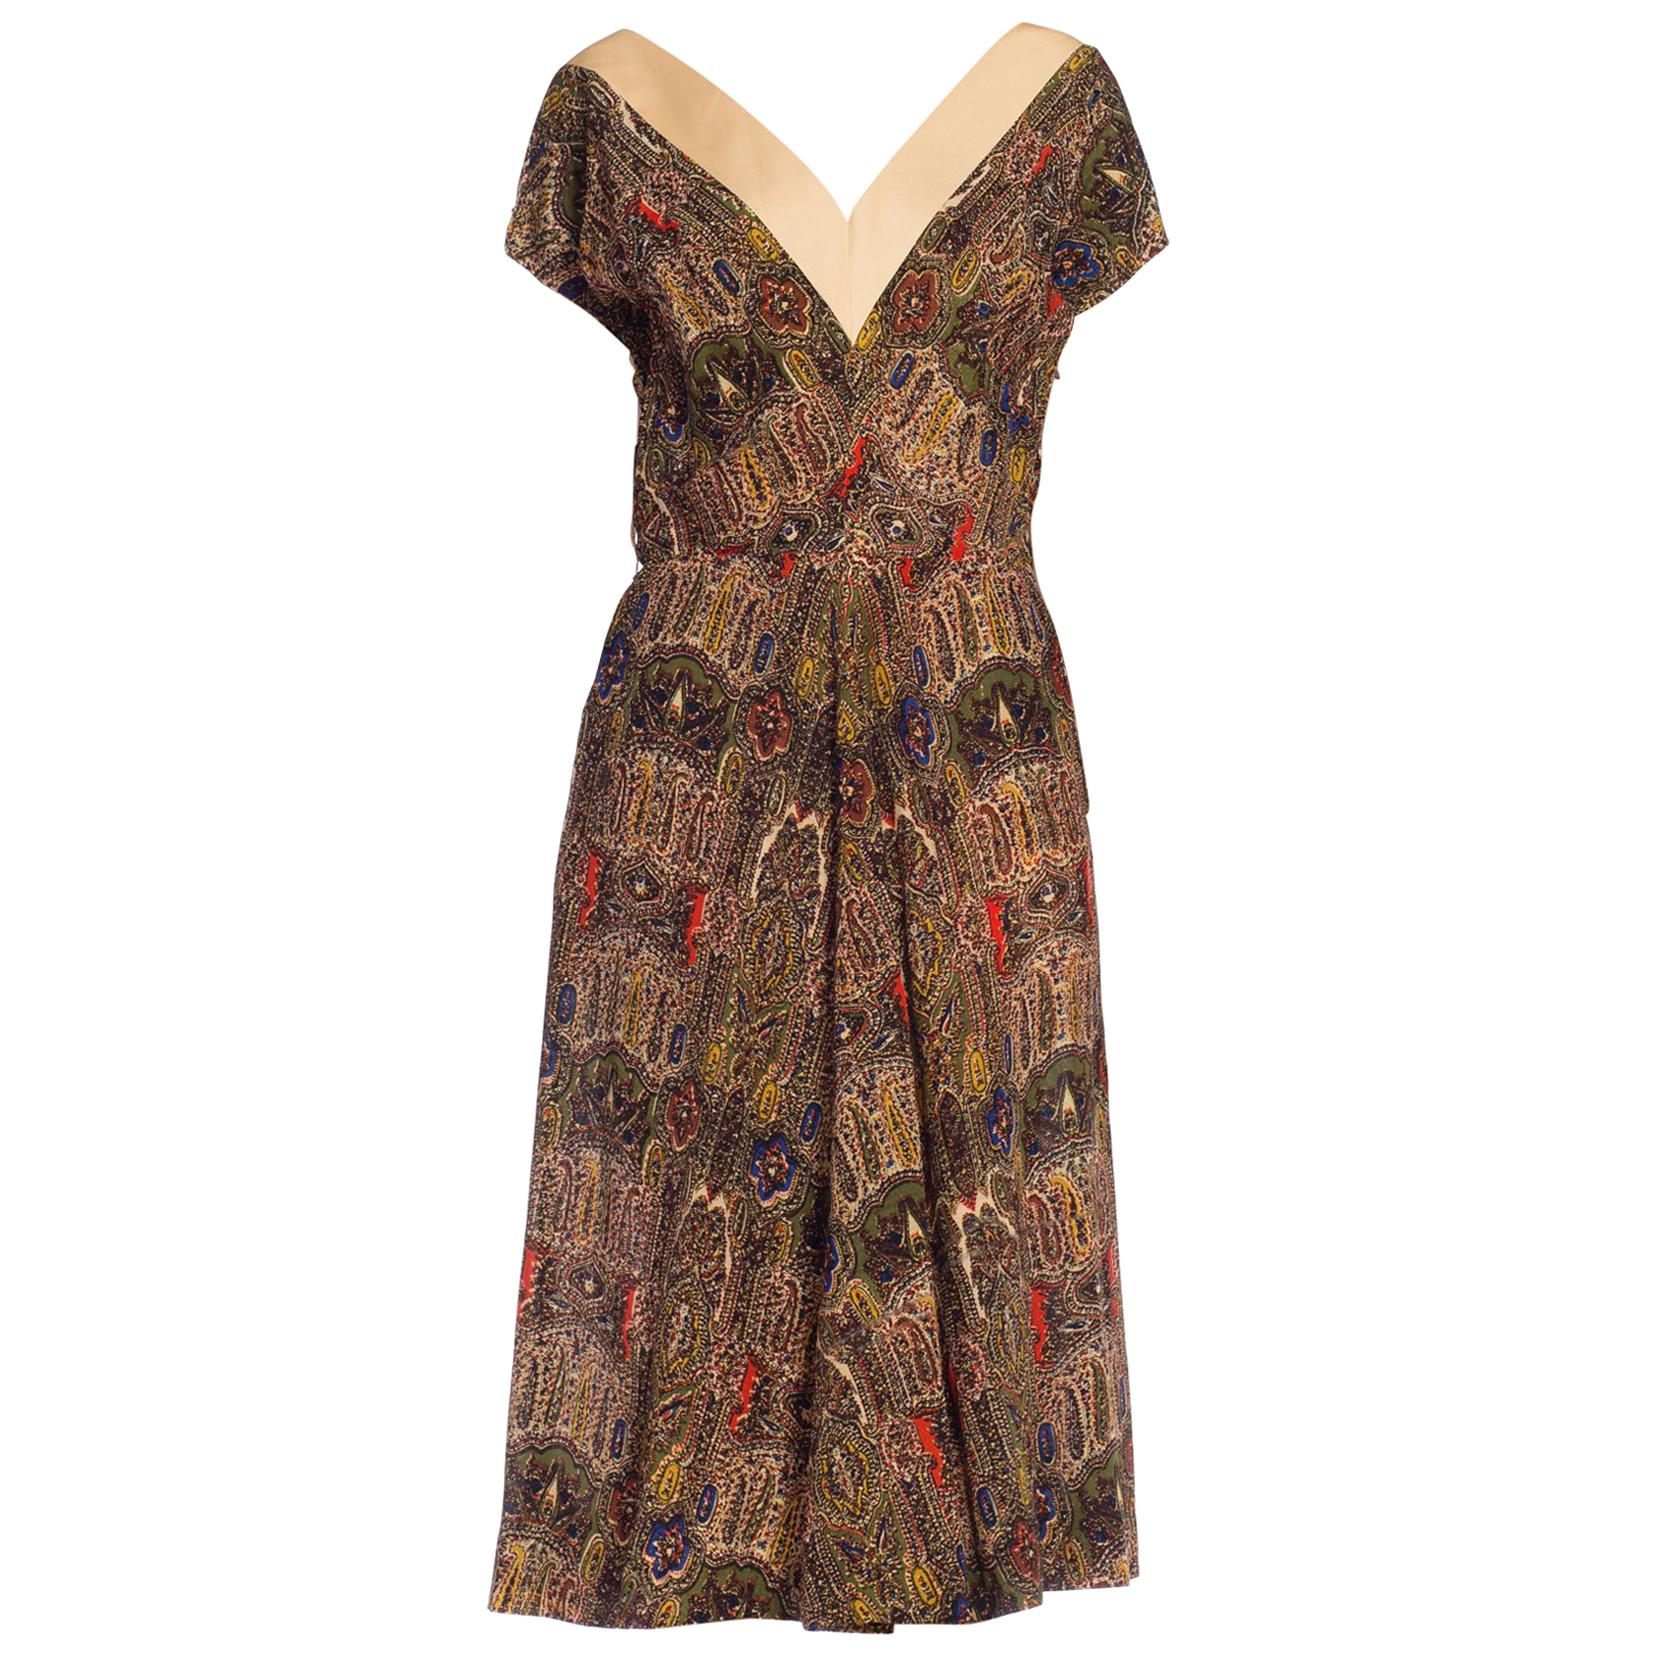 1950S CLAIRE MC CARDELL Multicolor Paisley Wool Day Dress